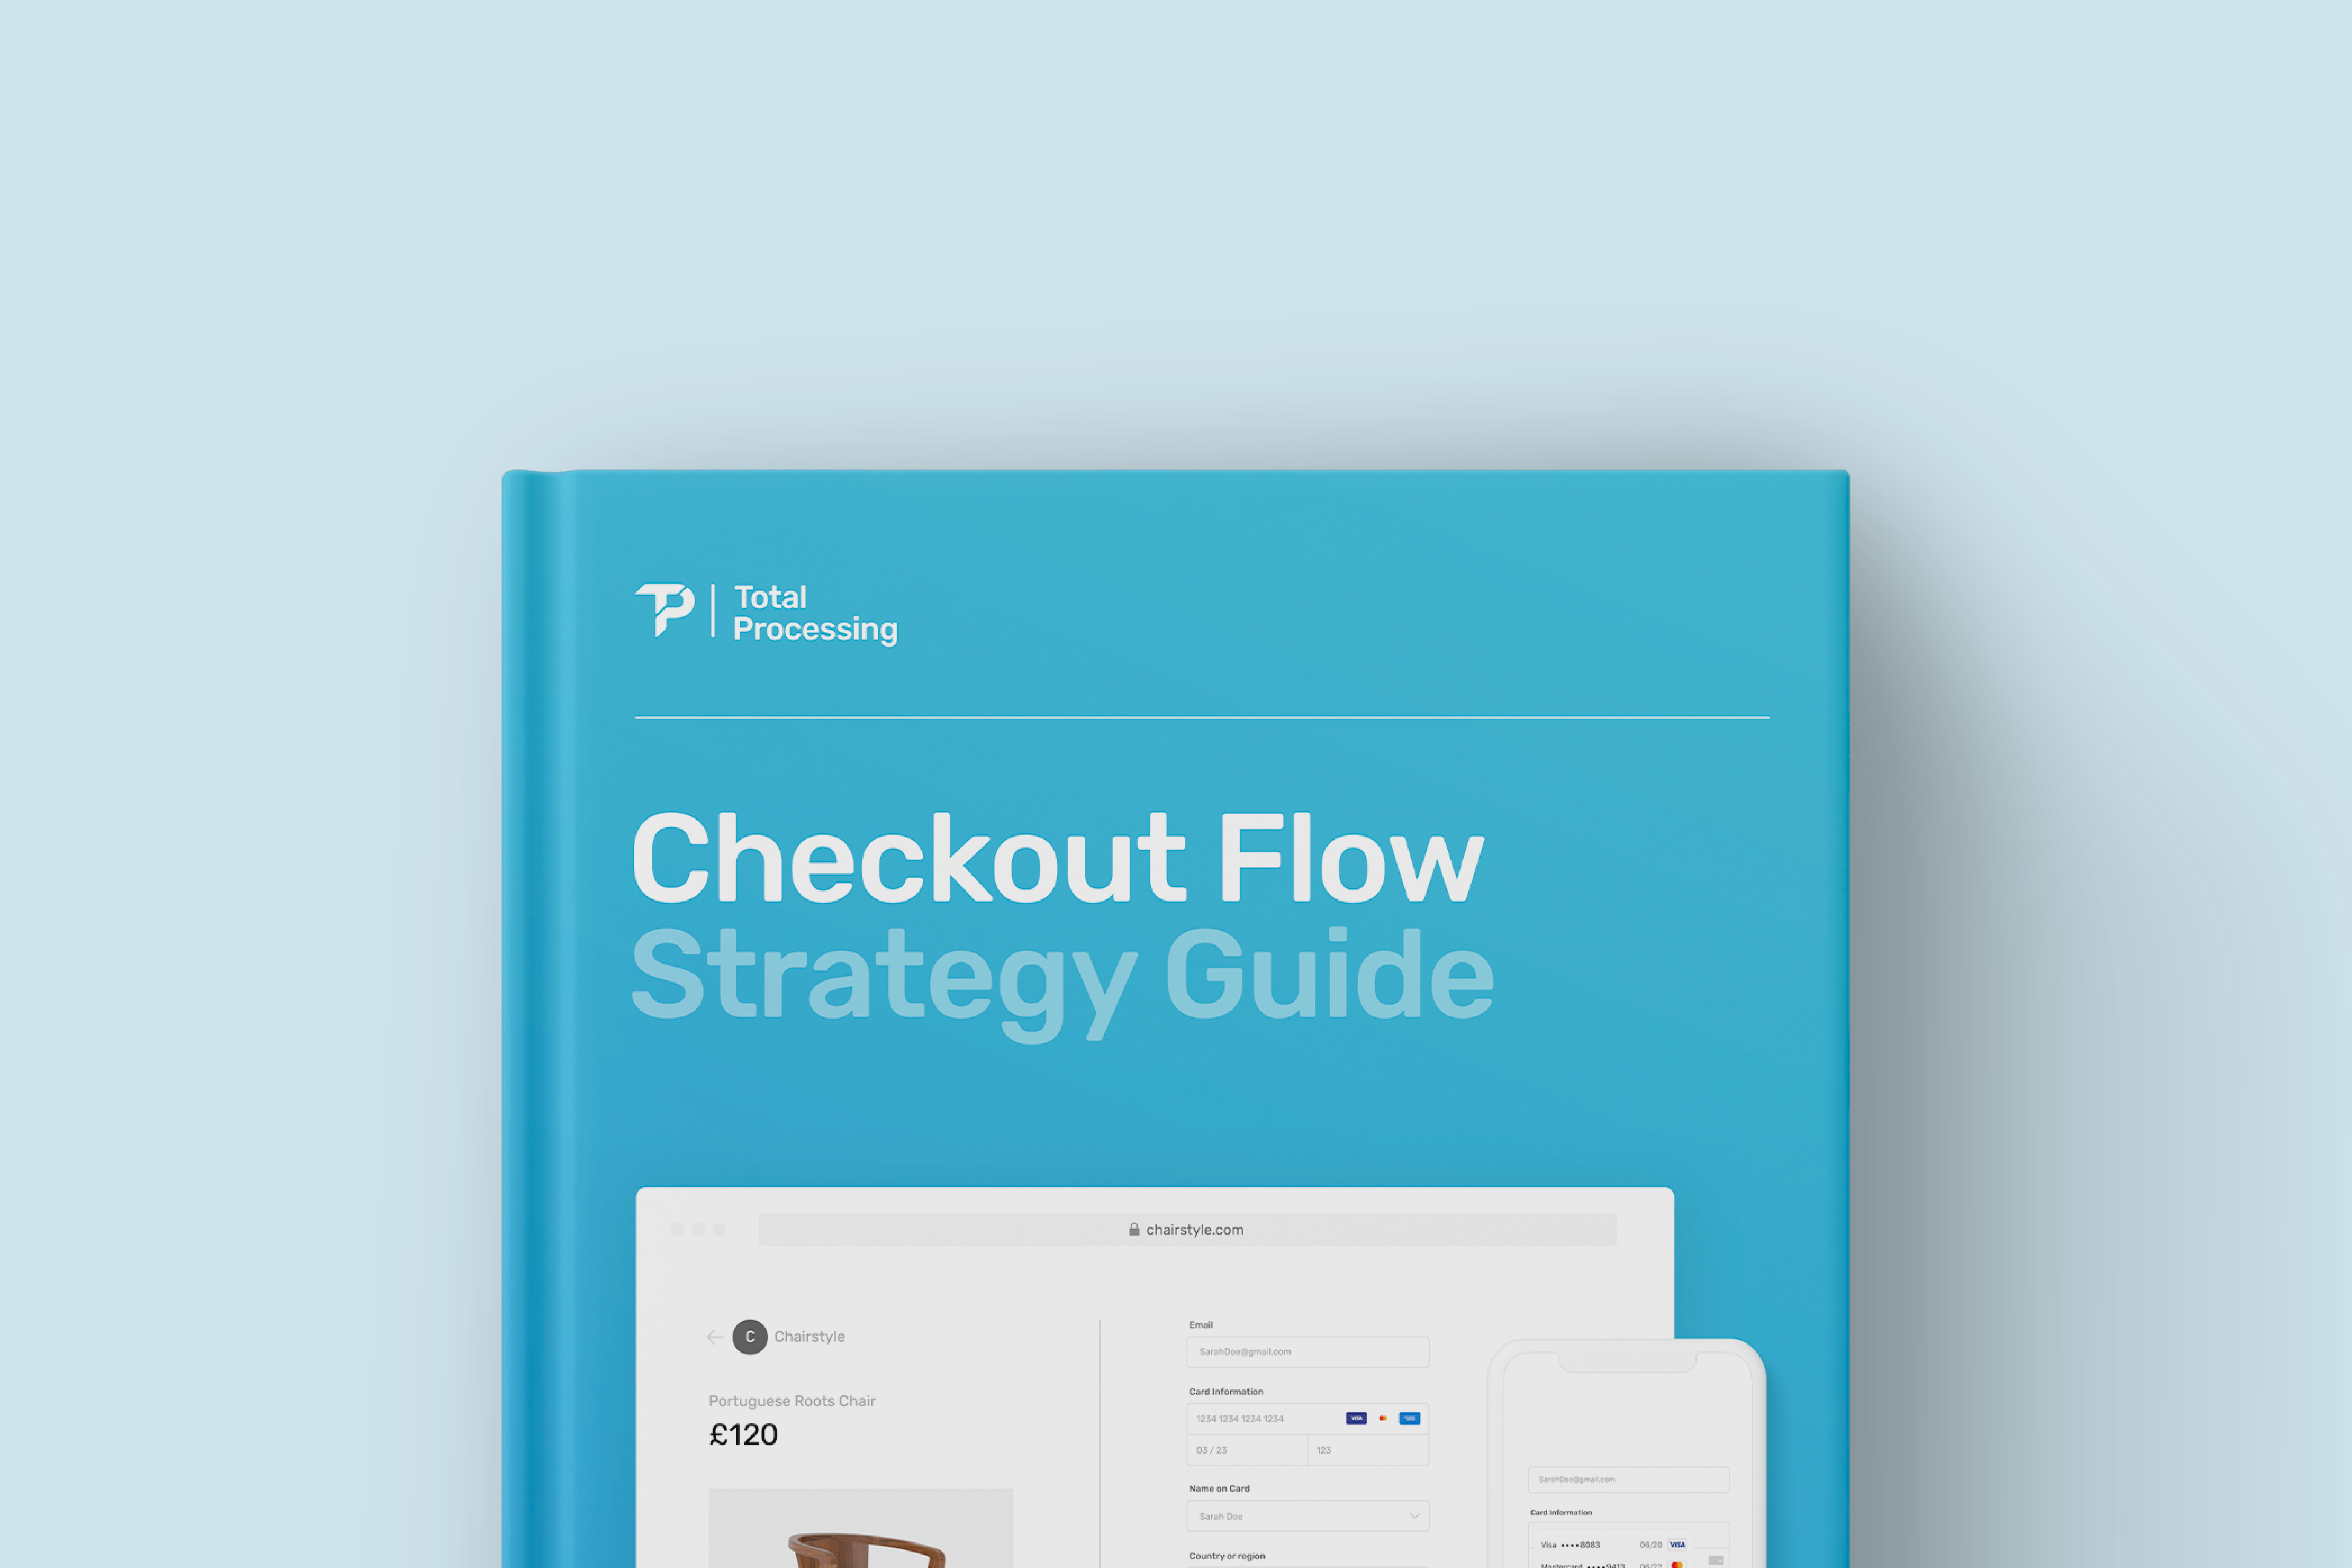 Checkout flow | Strategy guide